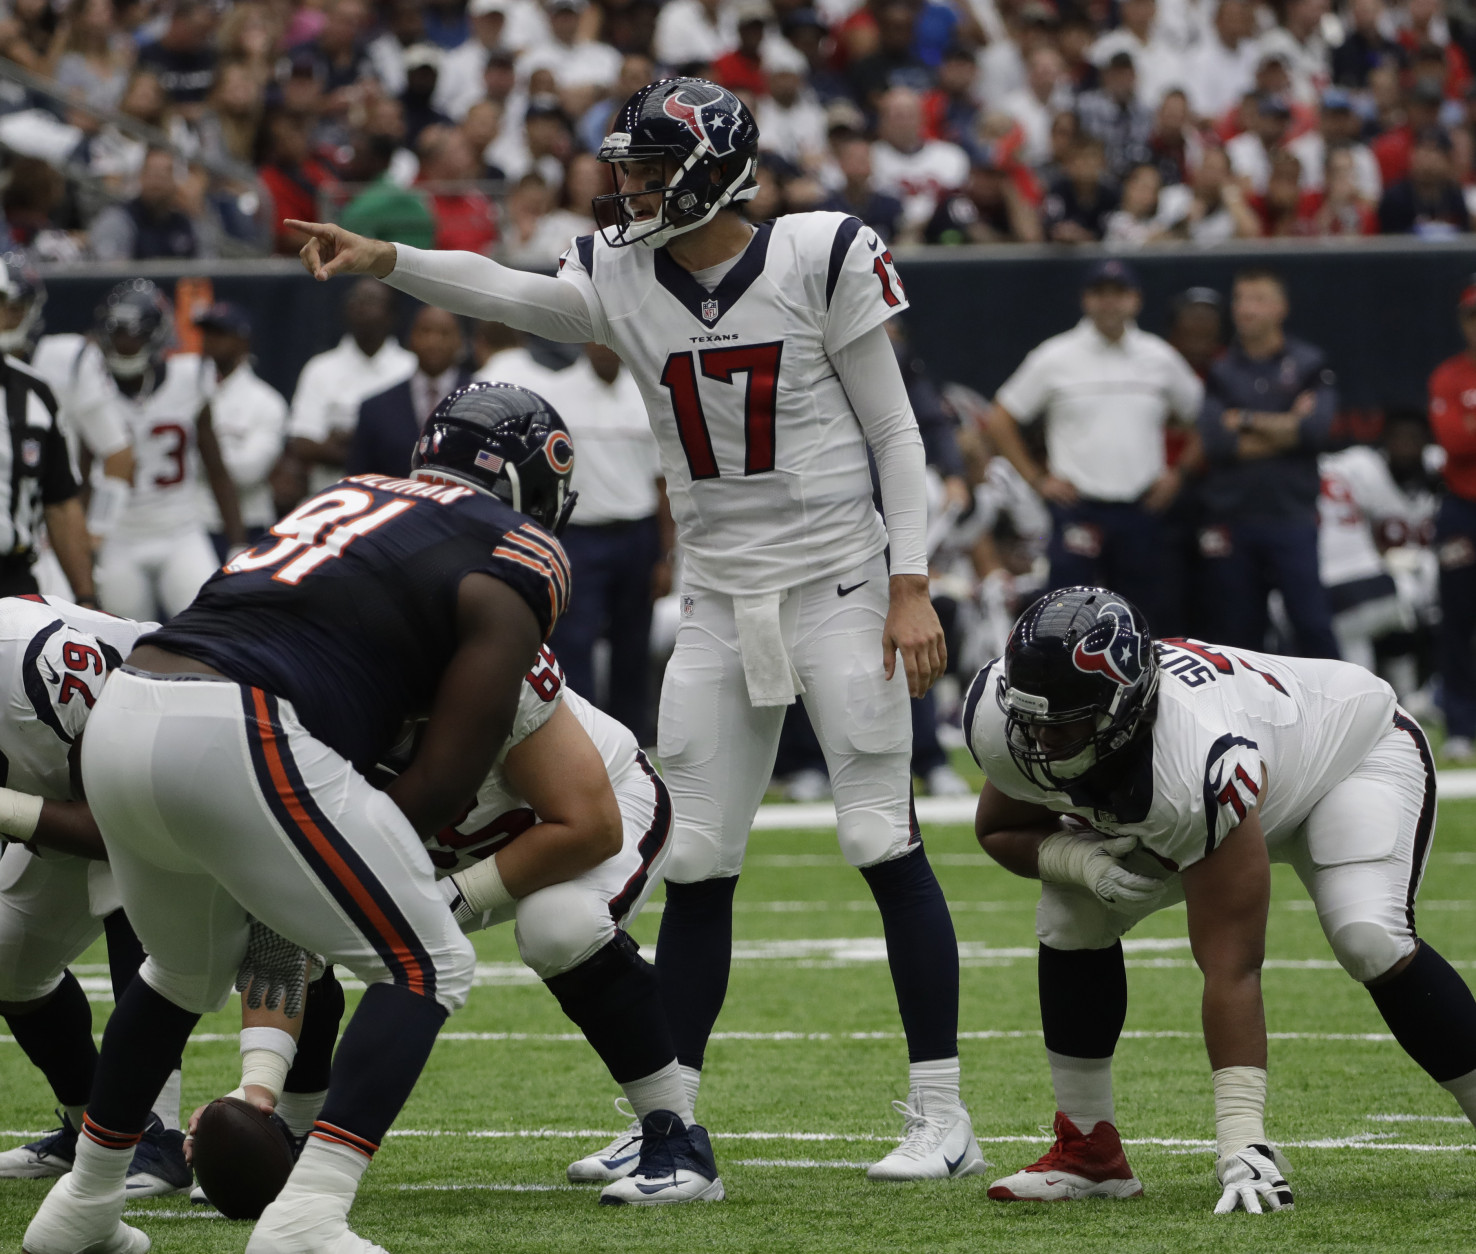 Houston Texans quarterback Brock Osweiler (17) is shown during the first half of an NFL football game Sunday, Sept. 11, 2016, in Houston. (AP Photo/David J. Phillip)